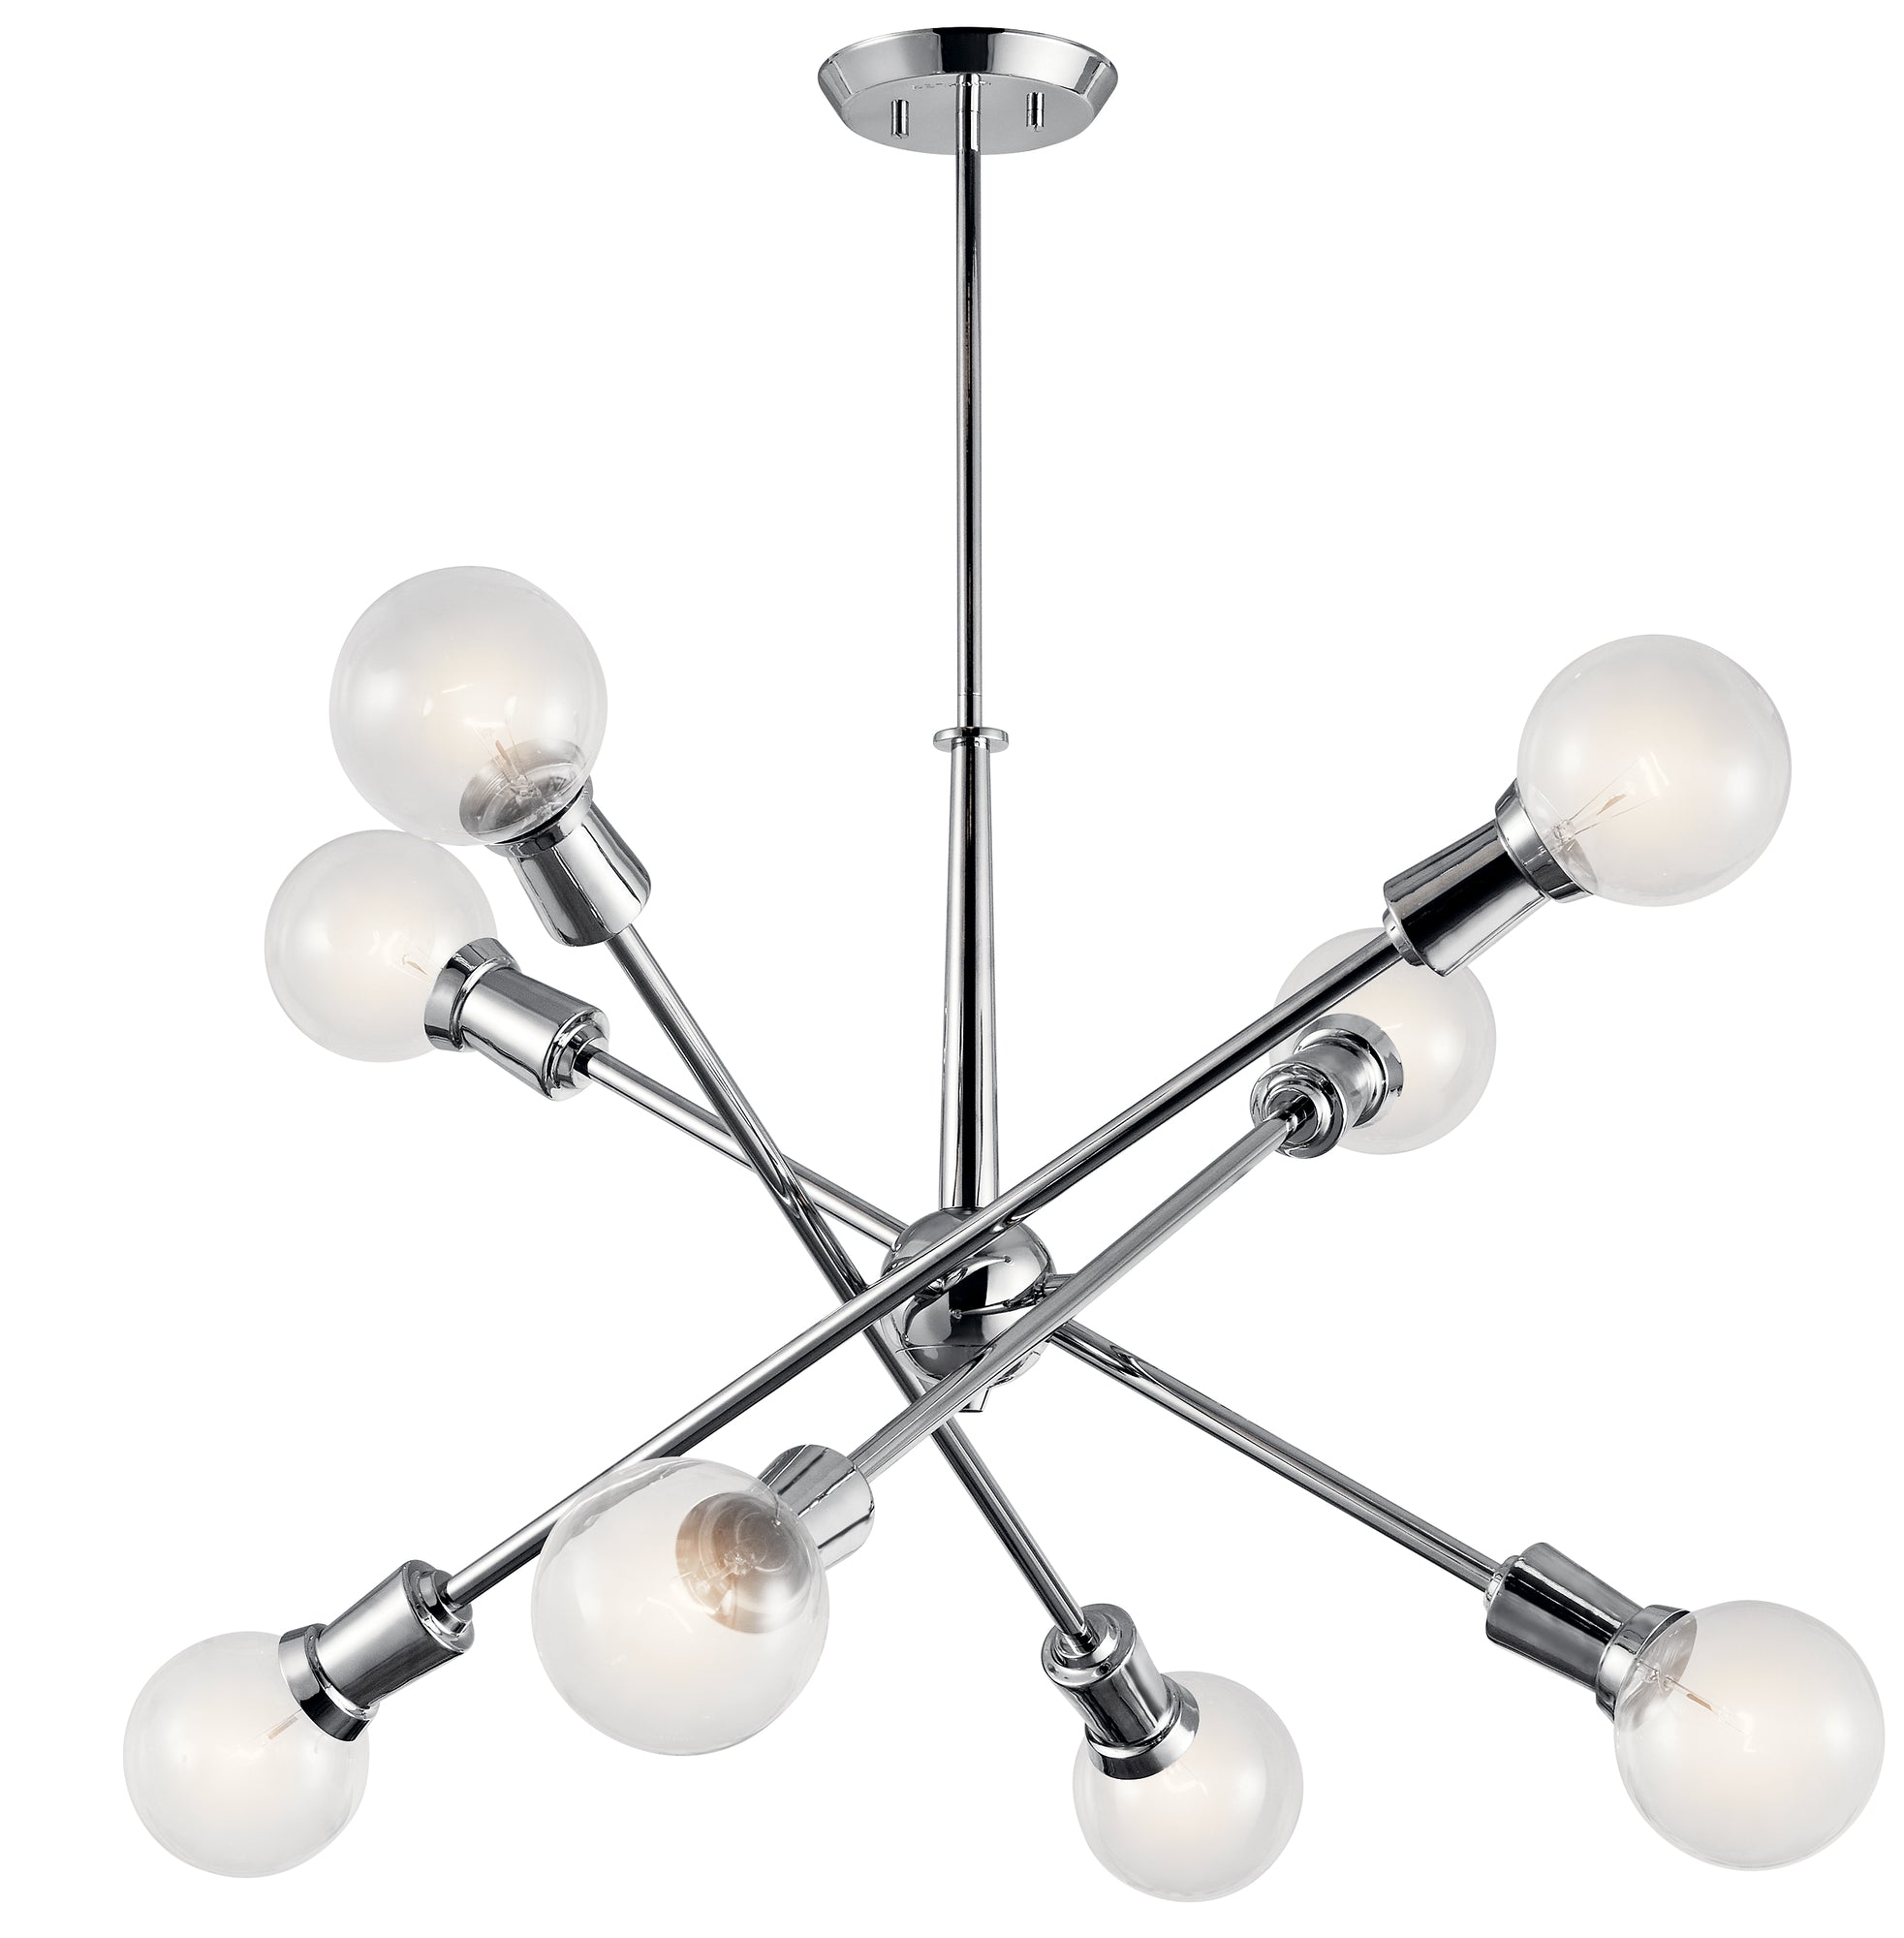 ARMSTRONG Chandelier Chrome - 43118CH | KICHLER